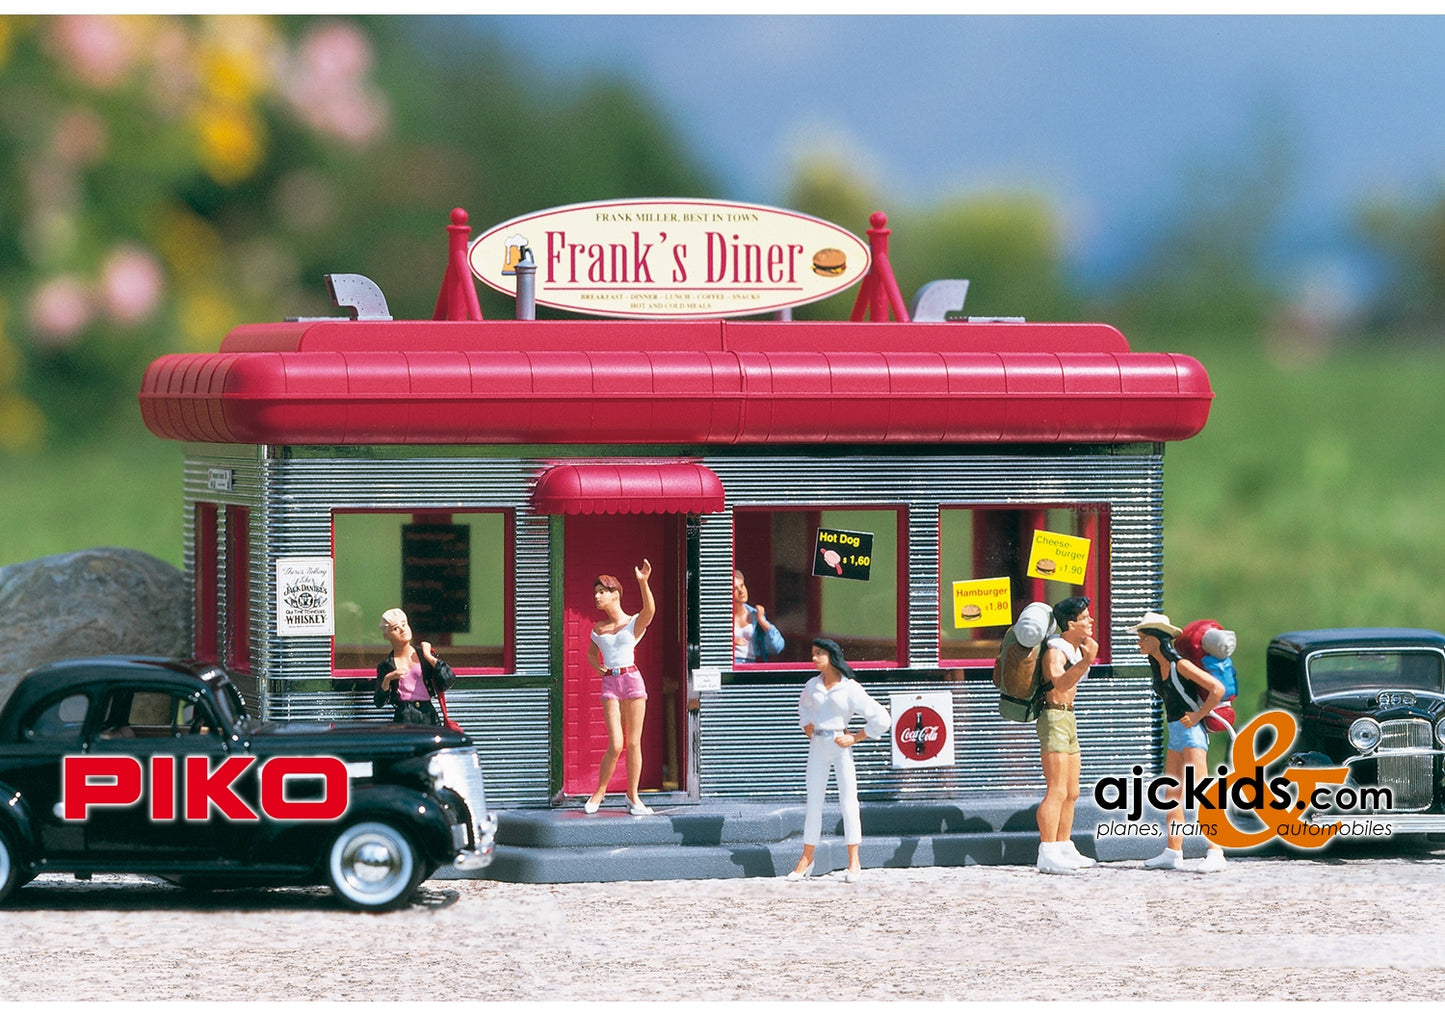 Piko 62250 - Downtown Diner